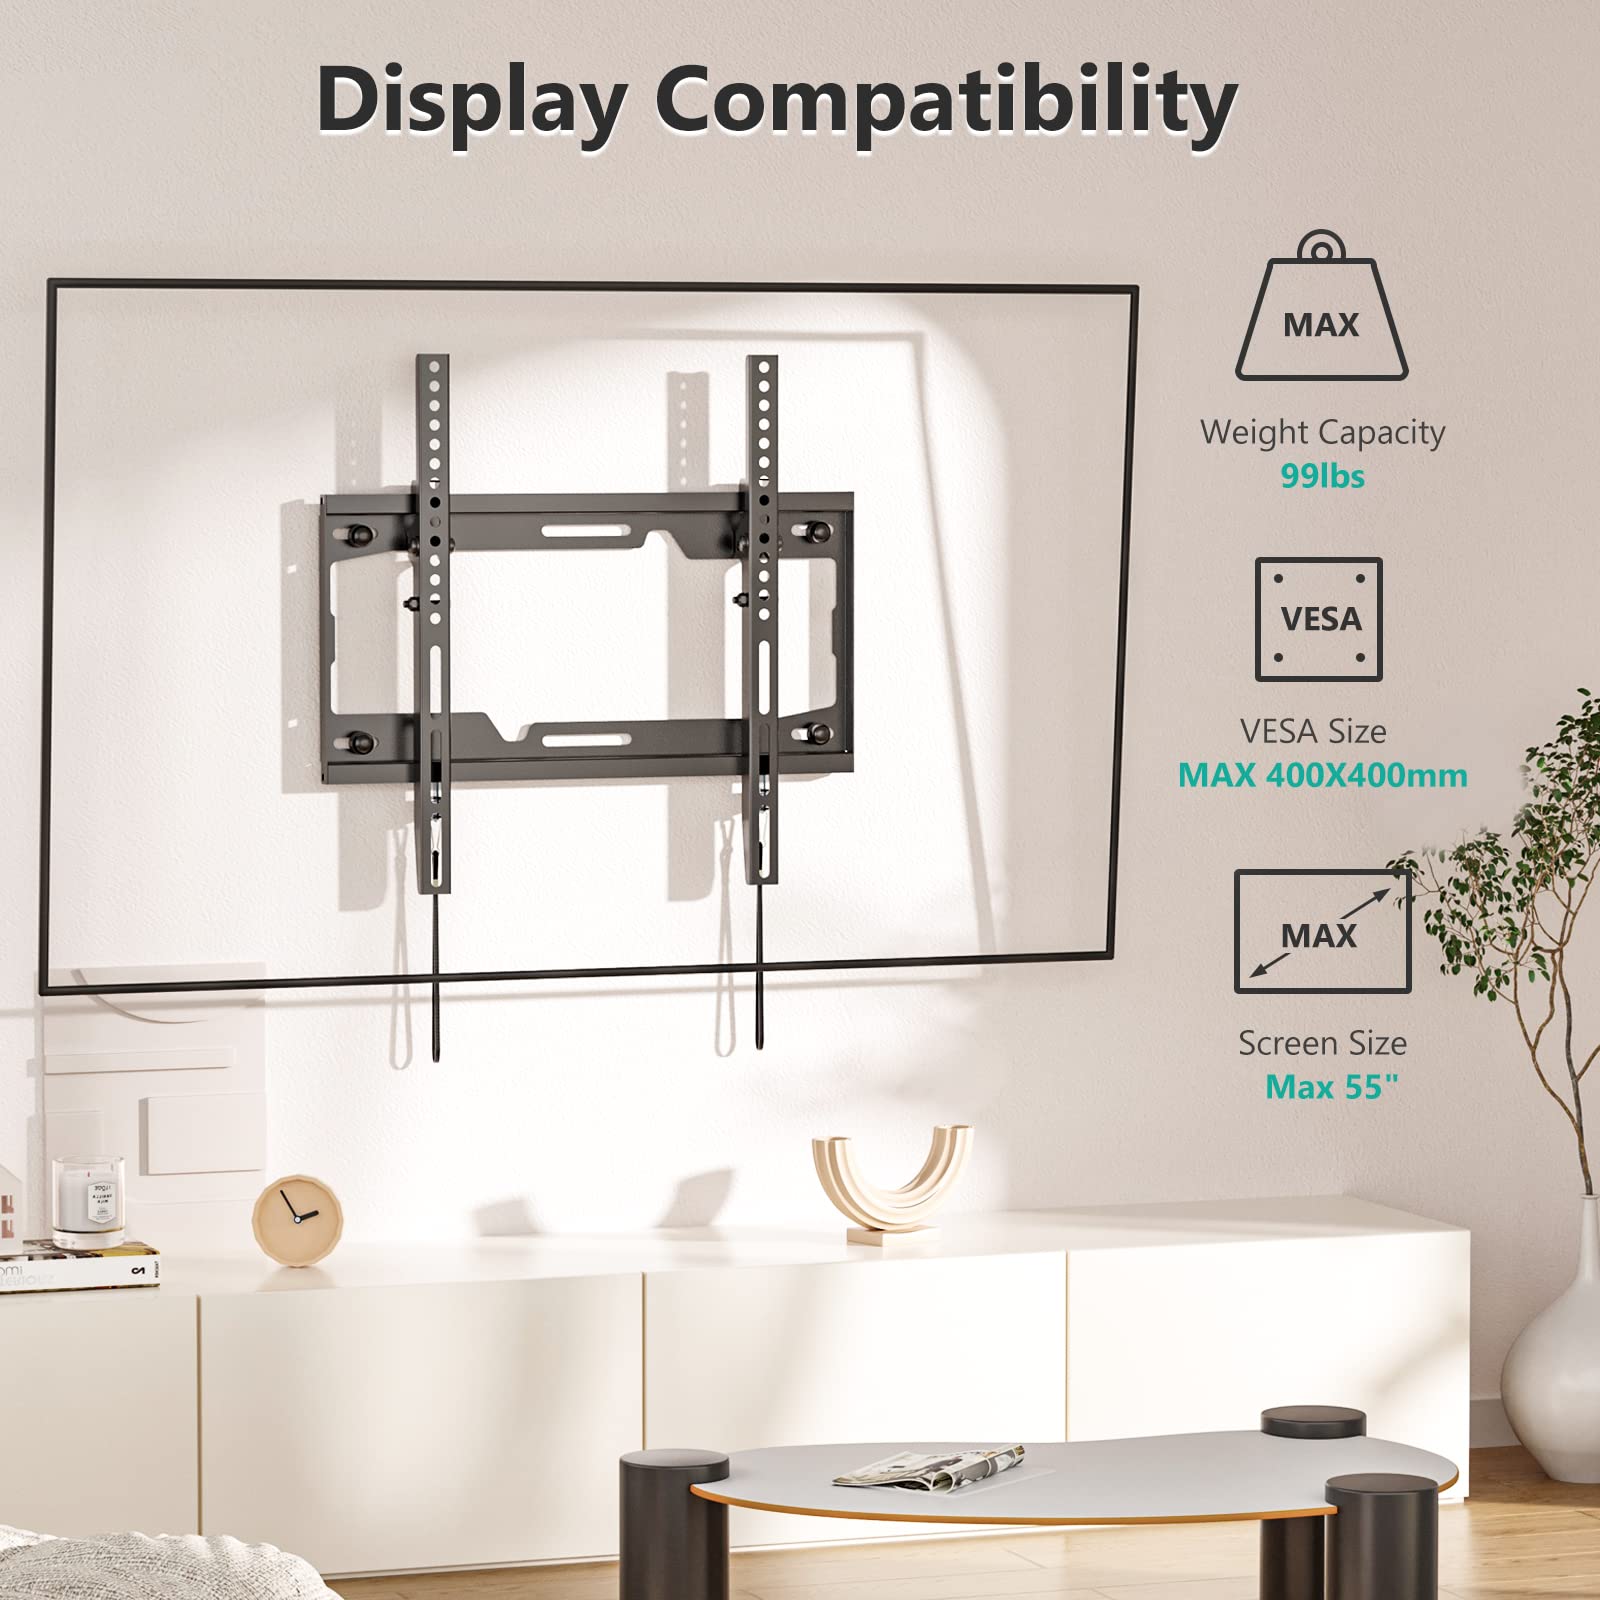 WALI Tilt TV Wall Mount Bracket for Most 26-55 inches LED, LCD, OLED Flat Screen TVs up to 99lbs with Mounting Holes 100x100mm to 400x400mm (TTM-1), Black